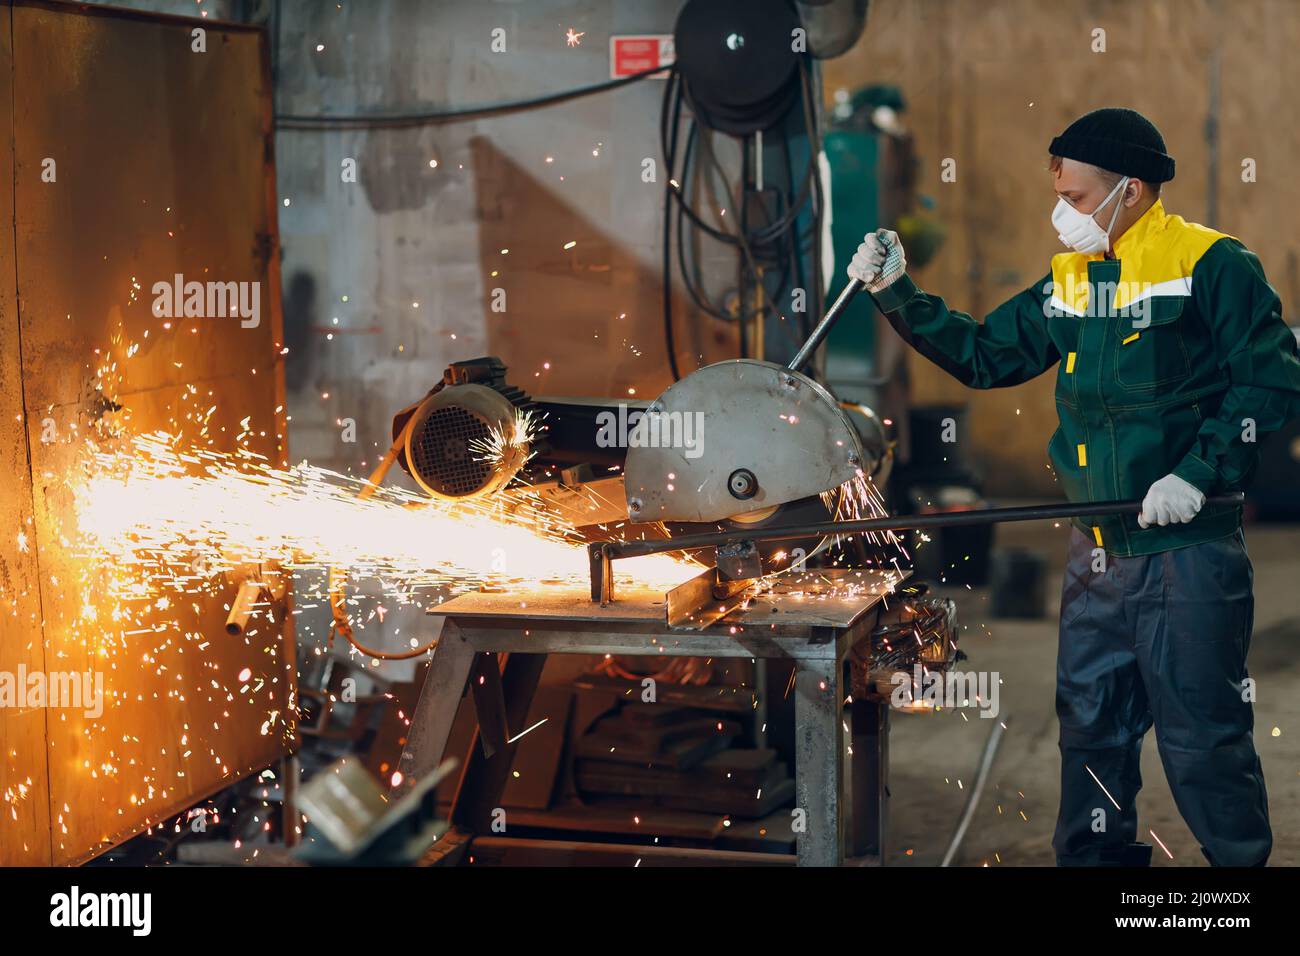 Metal processing with big angle grinder disk saw. Sparks in metalworking at factory. Stock Photo